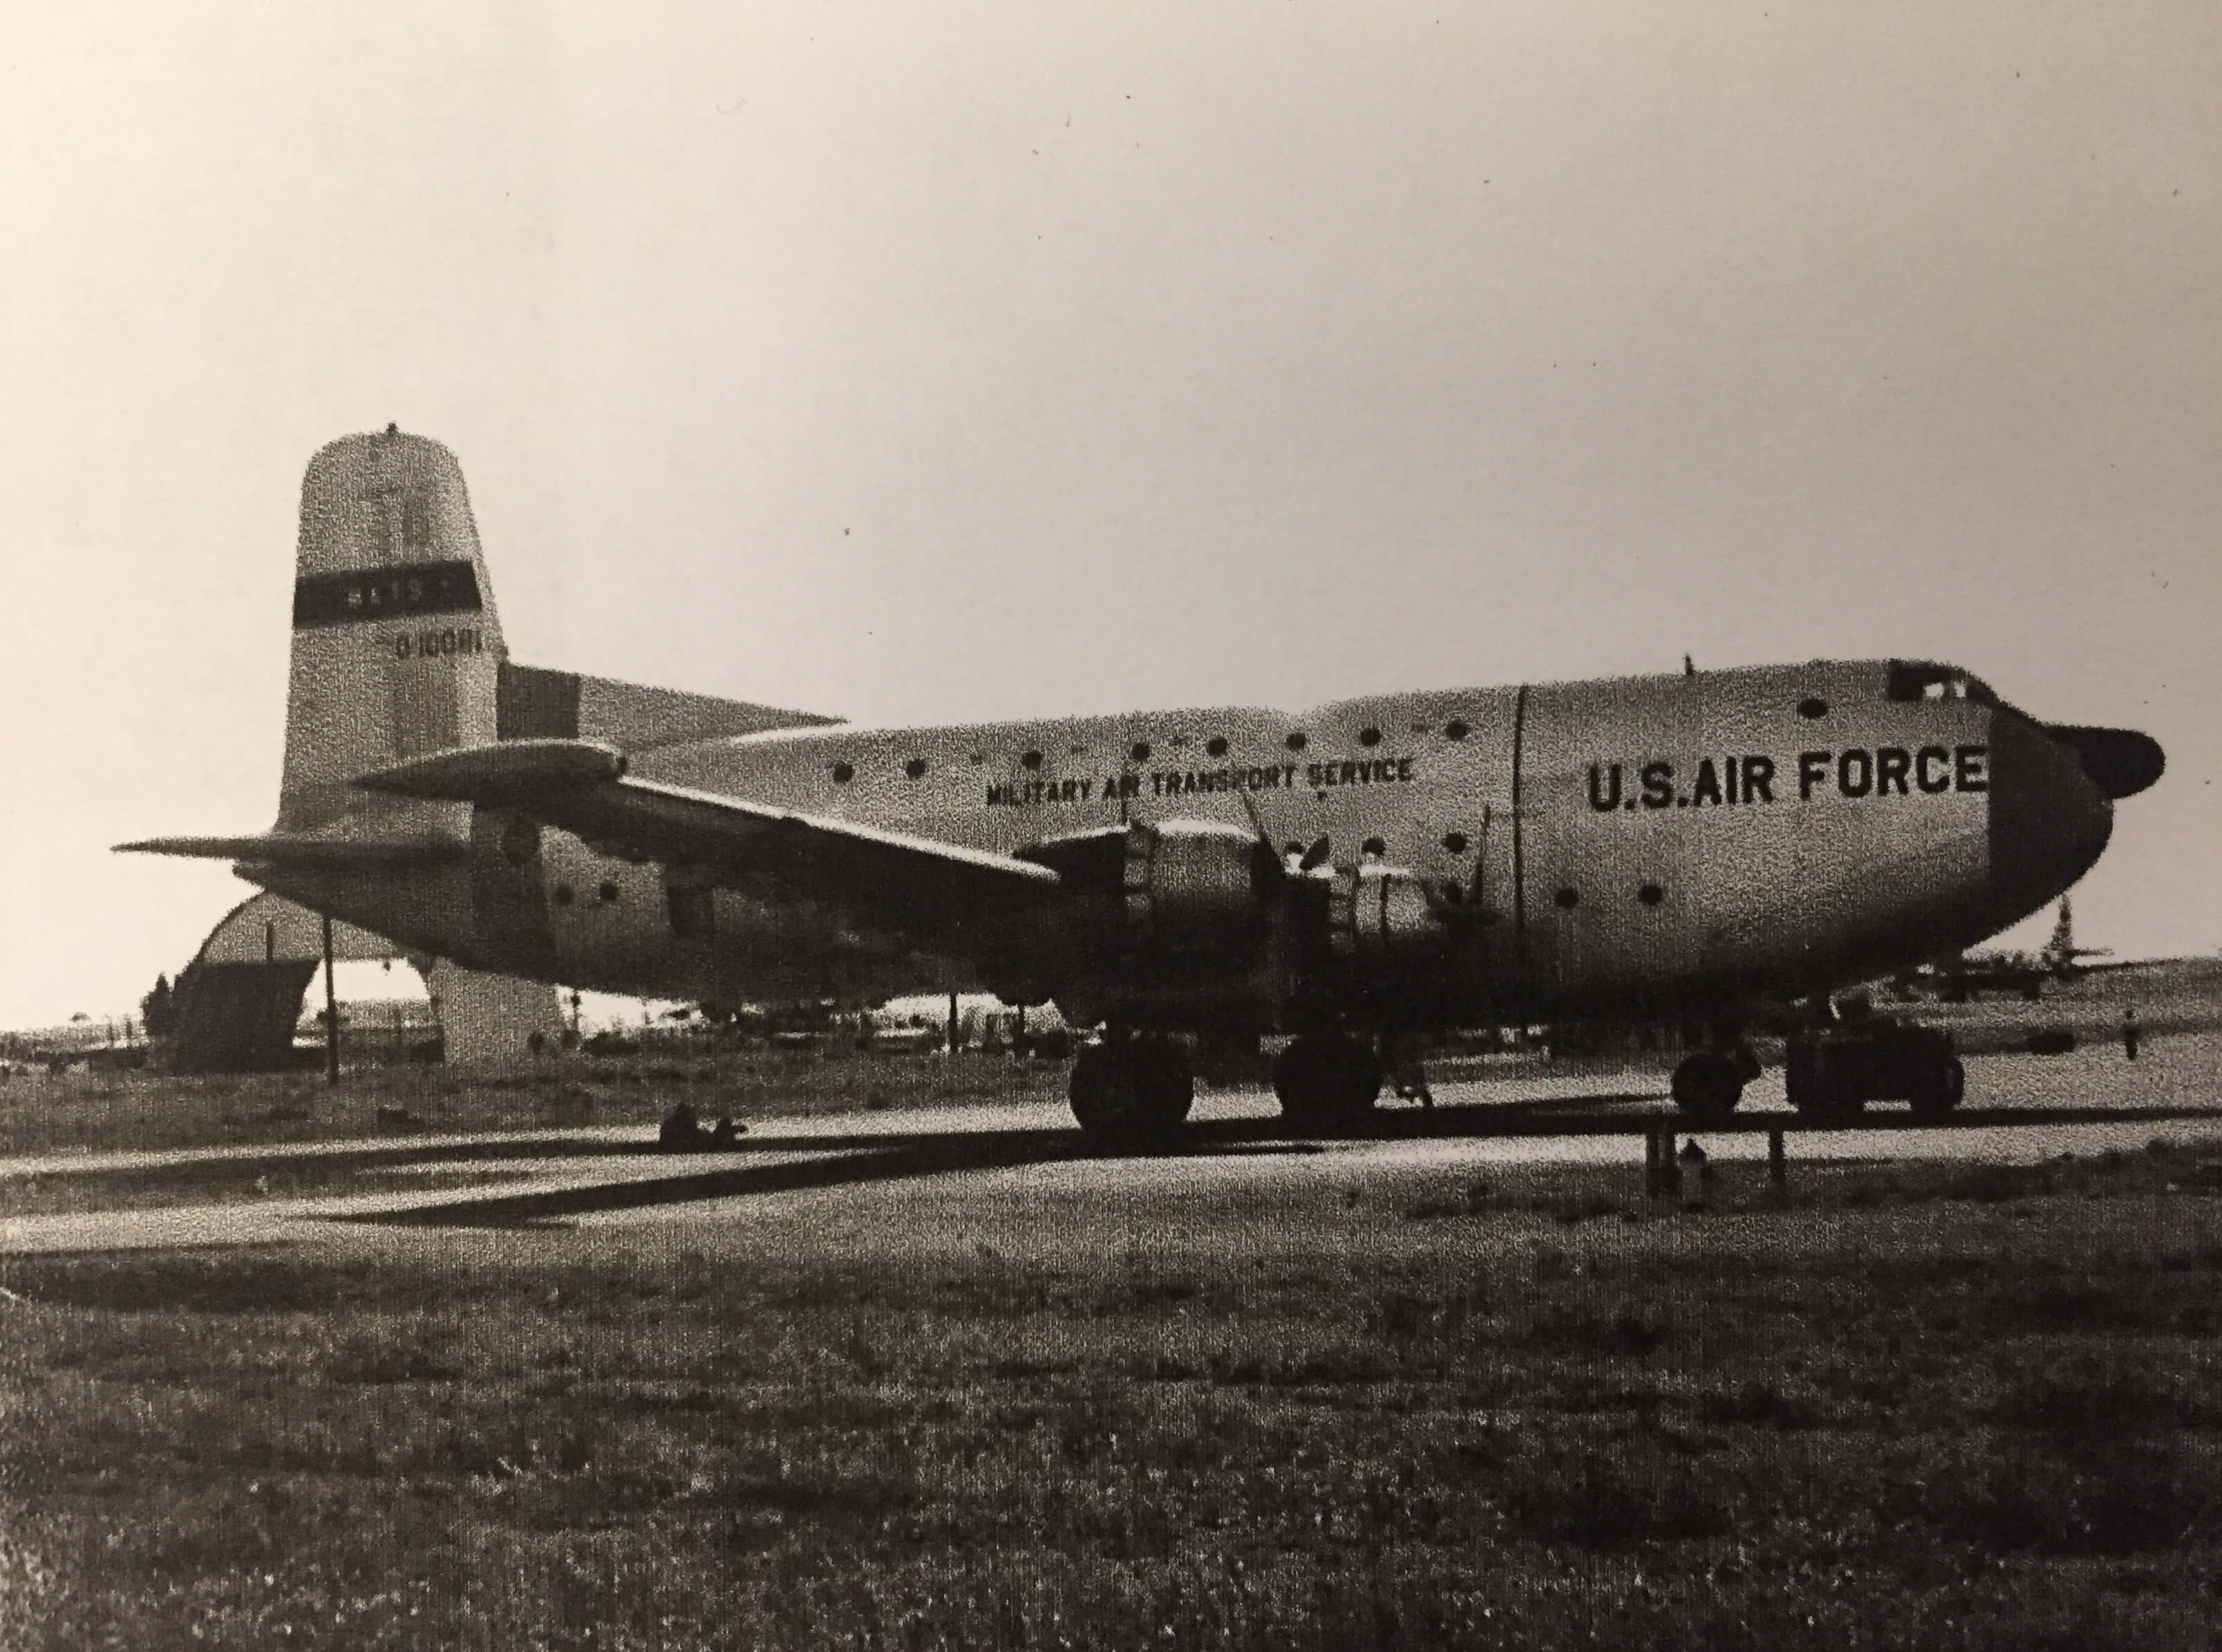 Large US Air Force airplane on the ground.